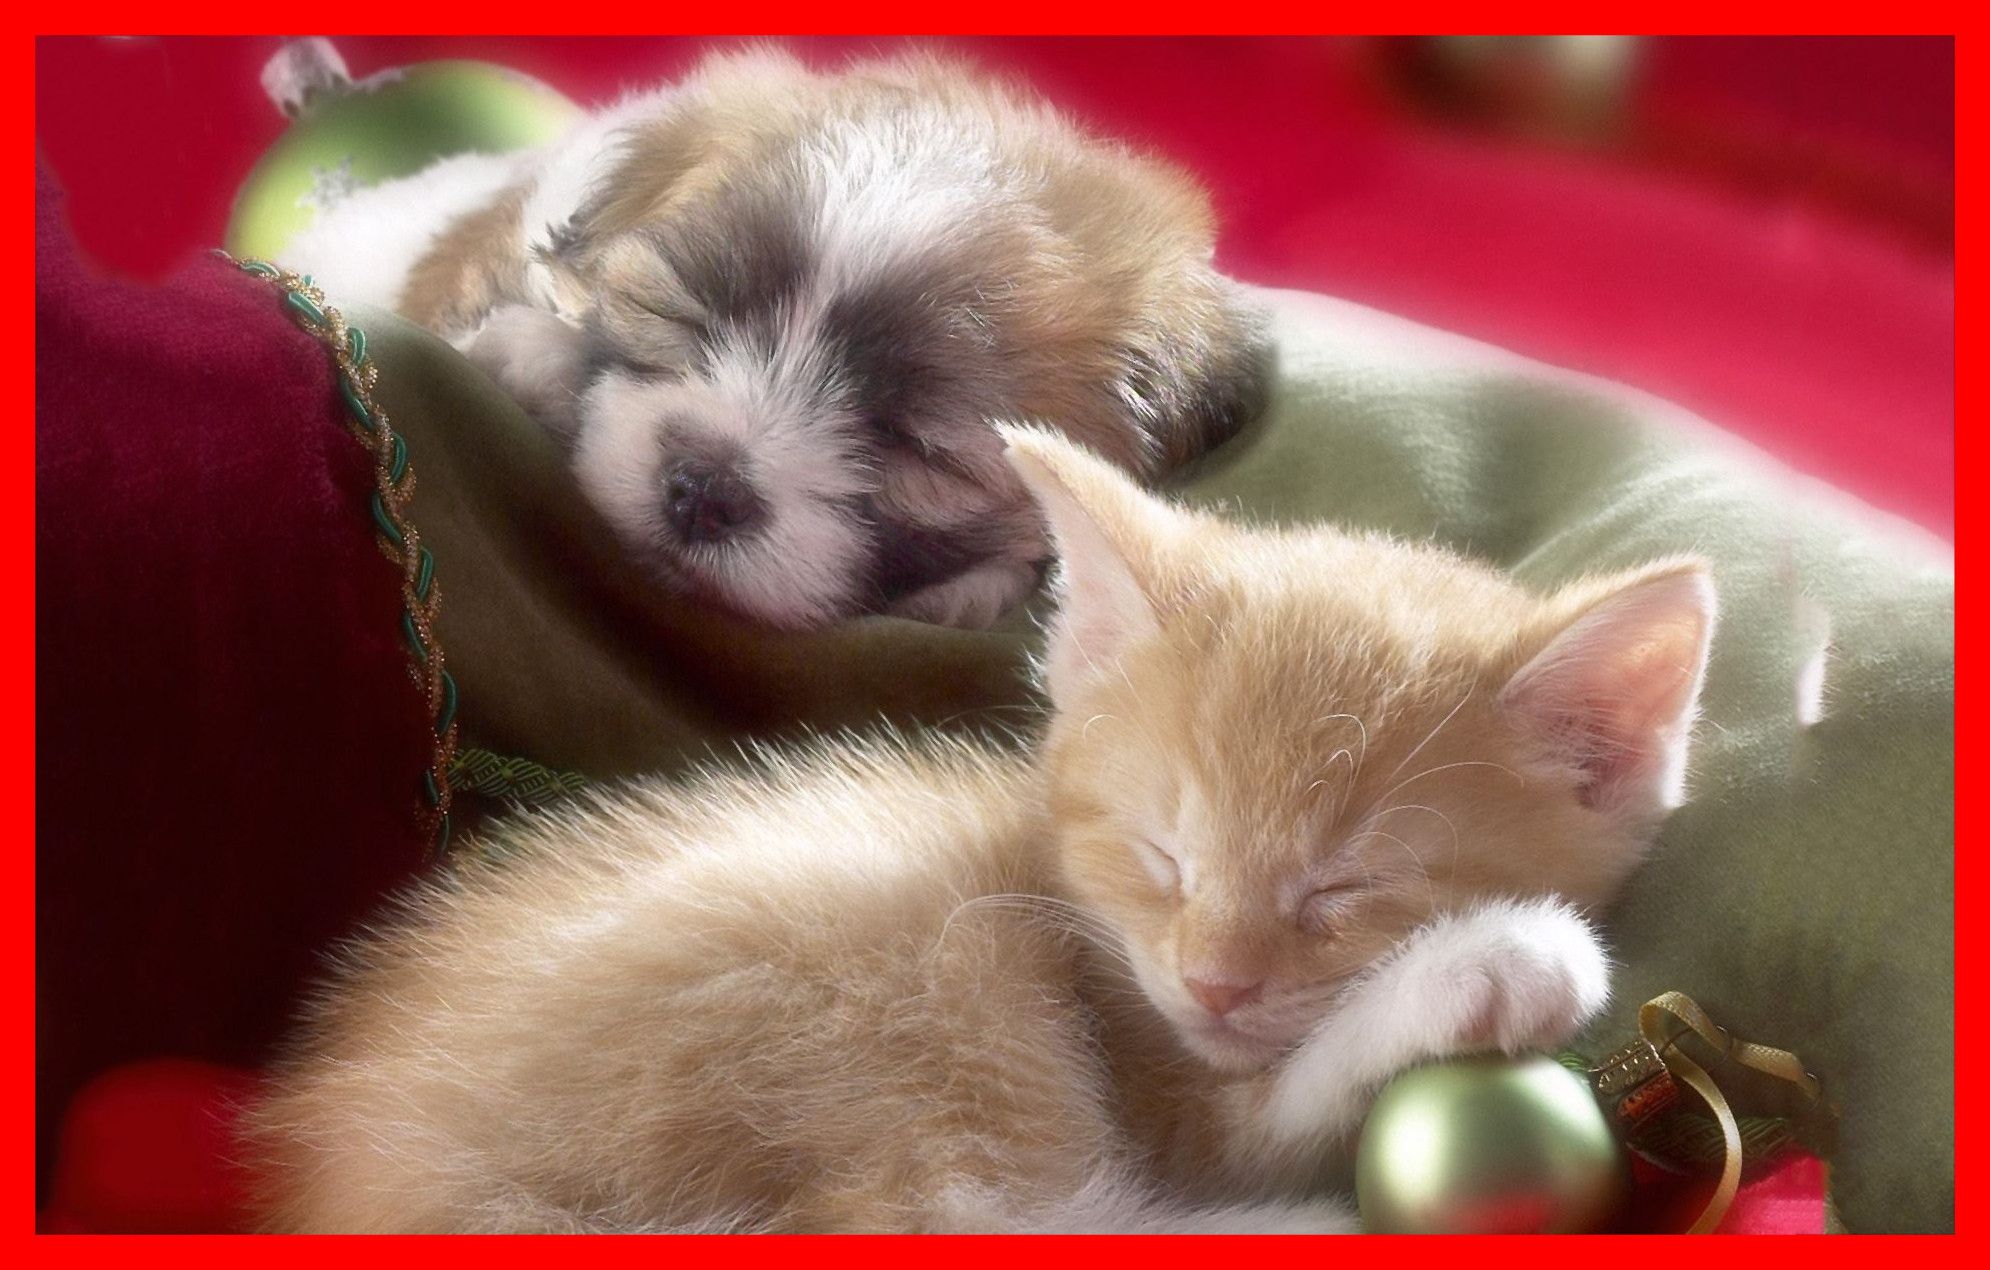 Fascinating Cute Kittens And Puppies Wallpaper Pets - Christmas Theme Wallpaper With Animals - HD Wallpaper 